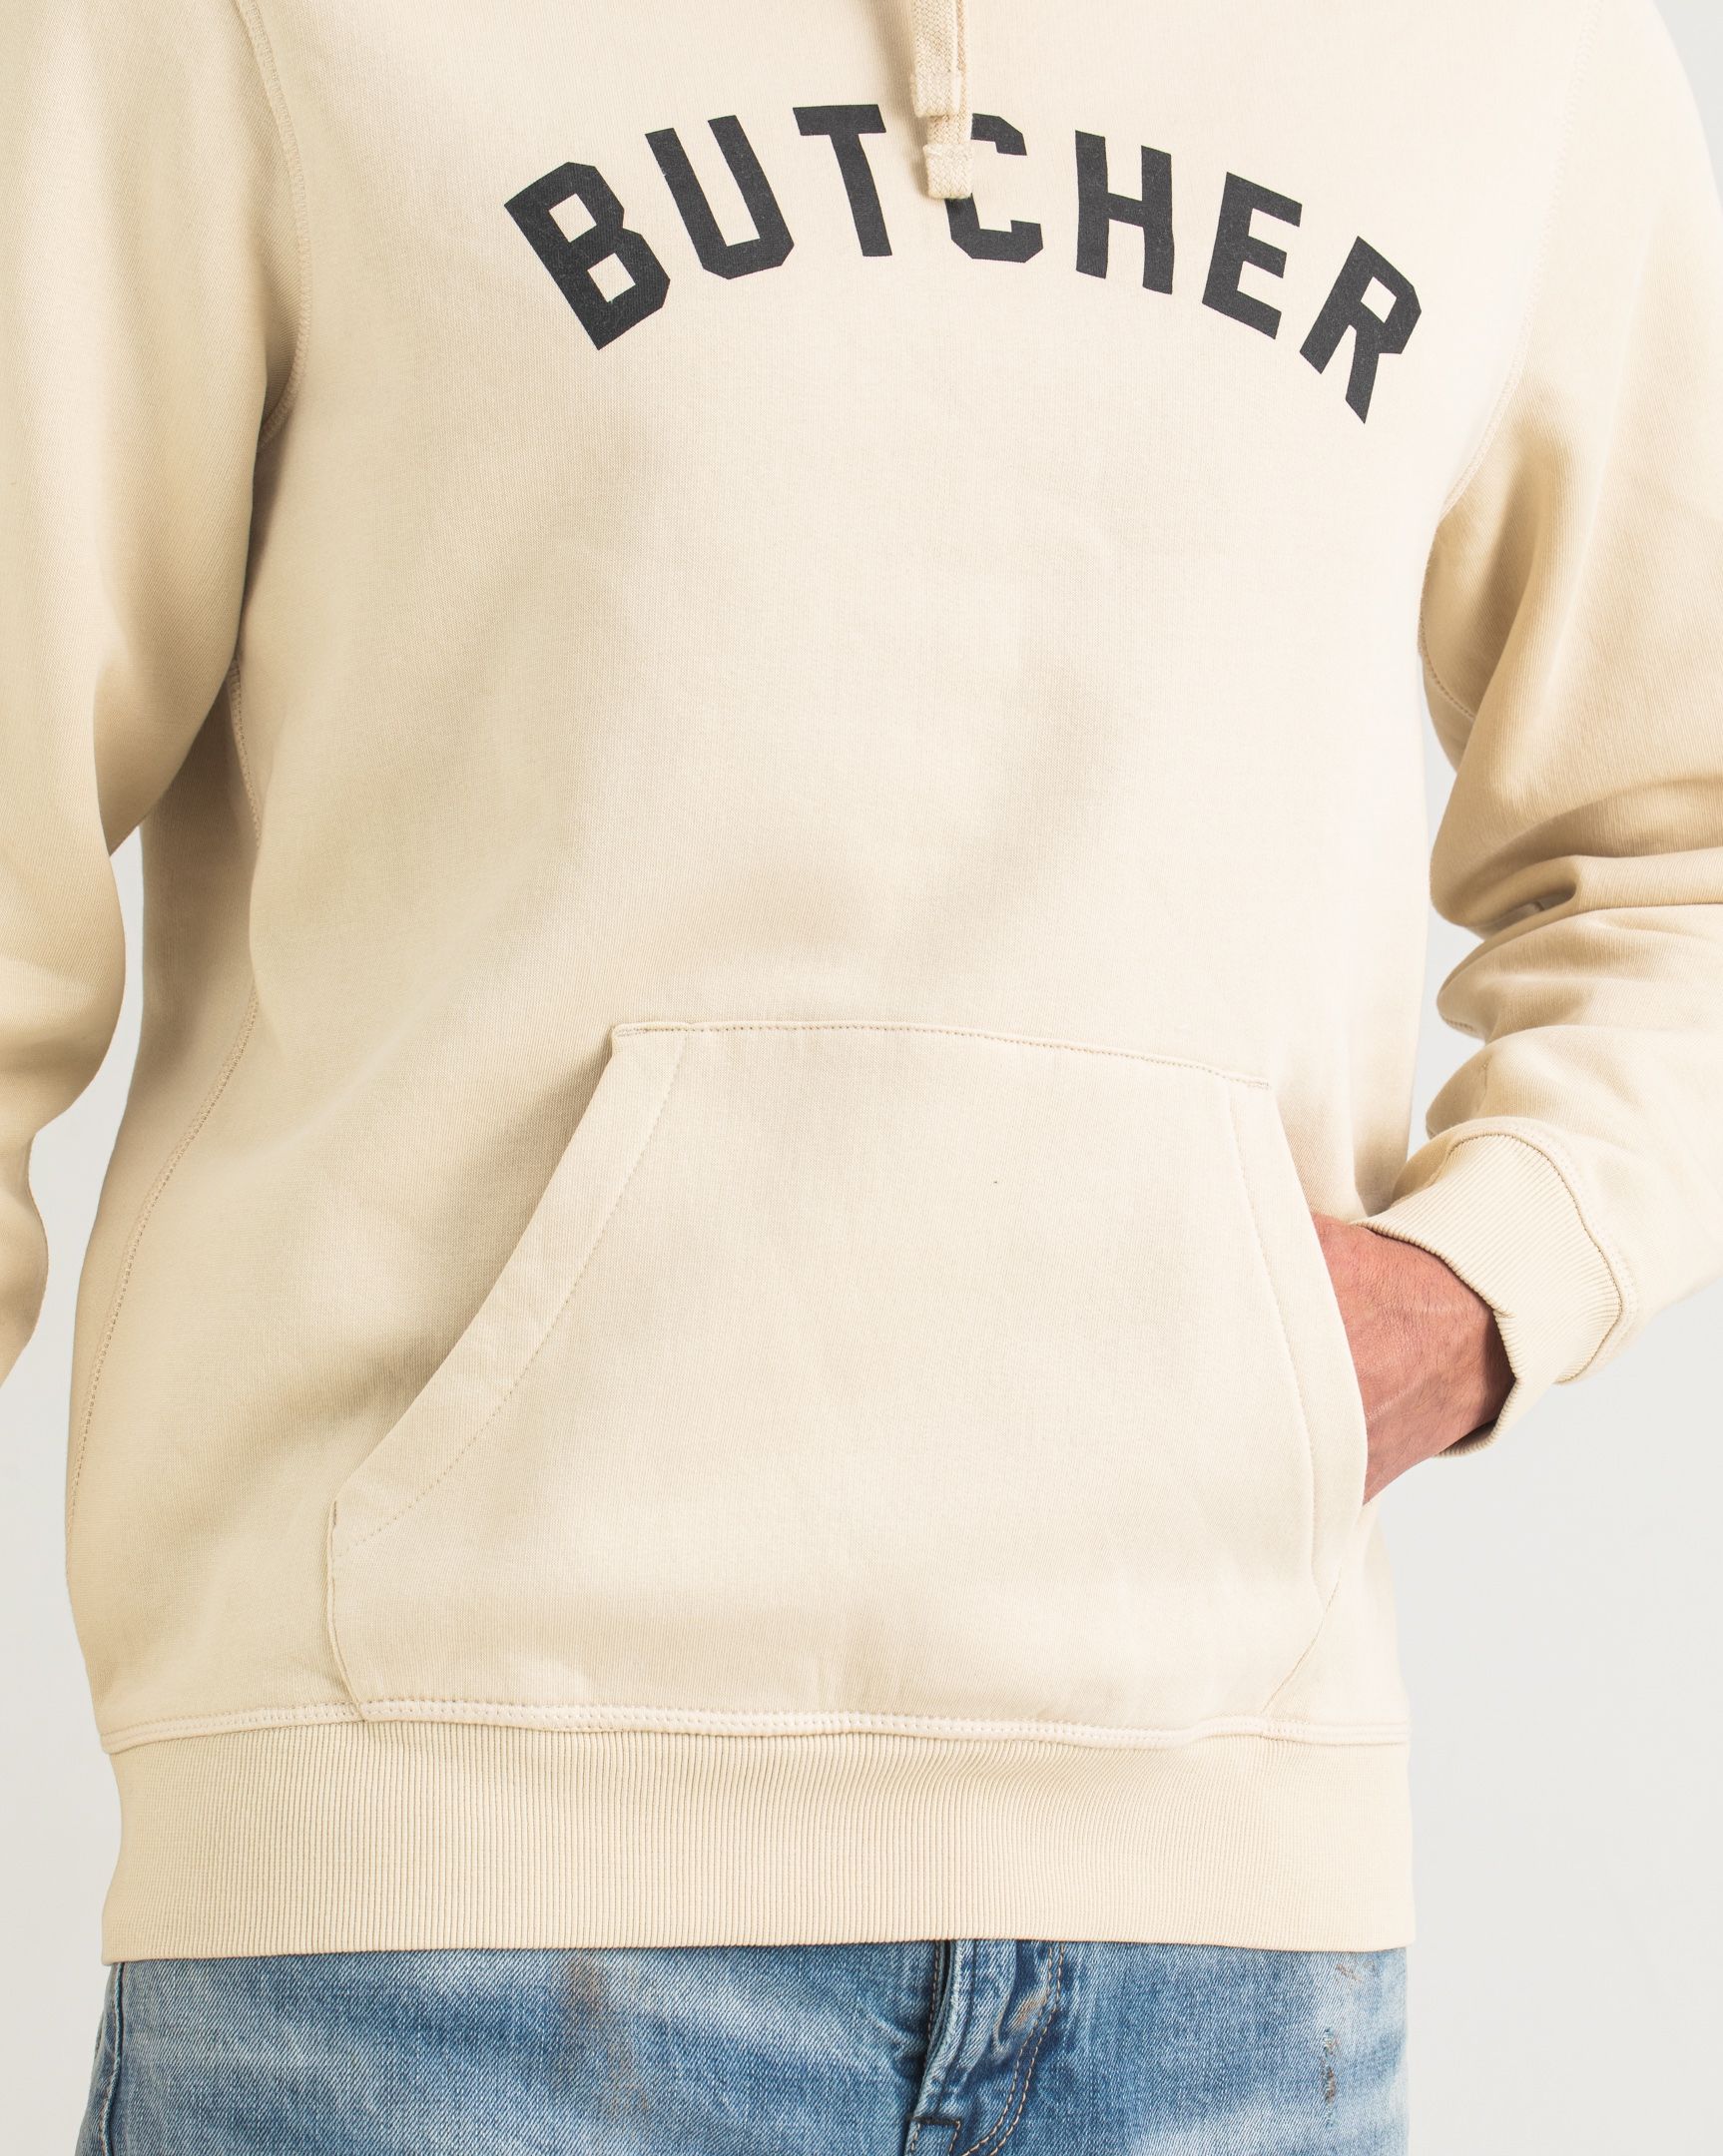 Butcher Army Hooded